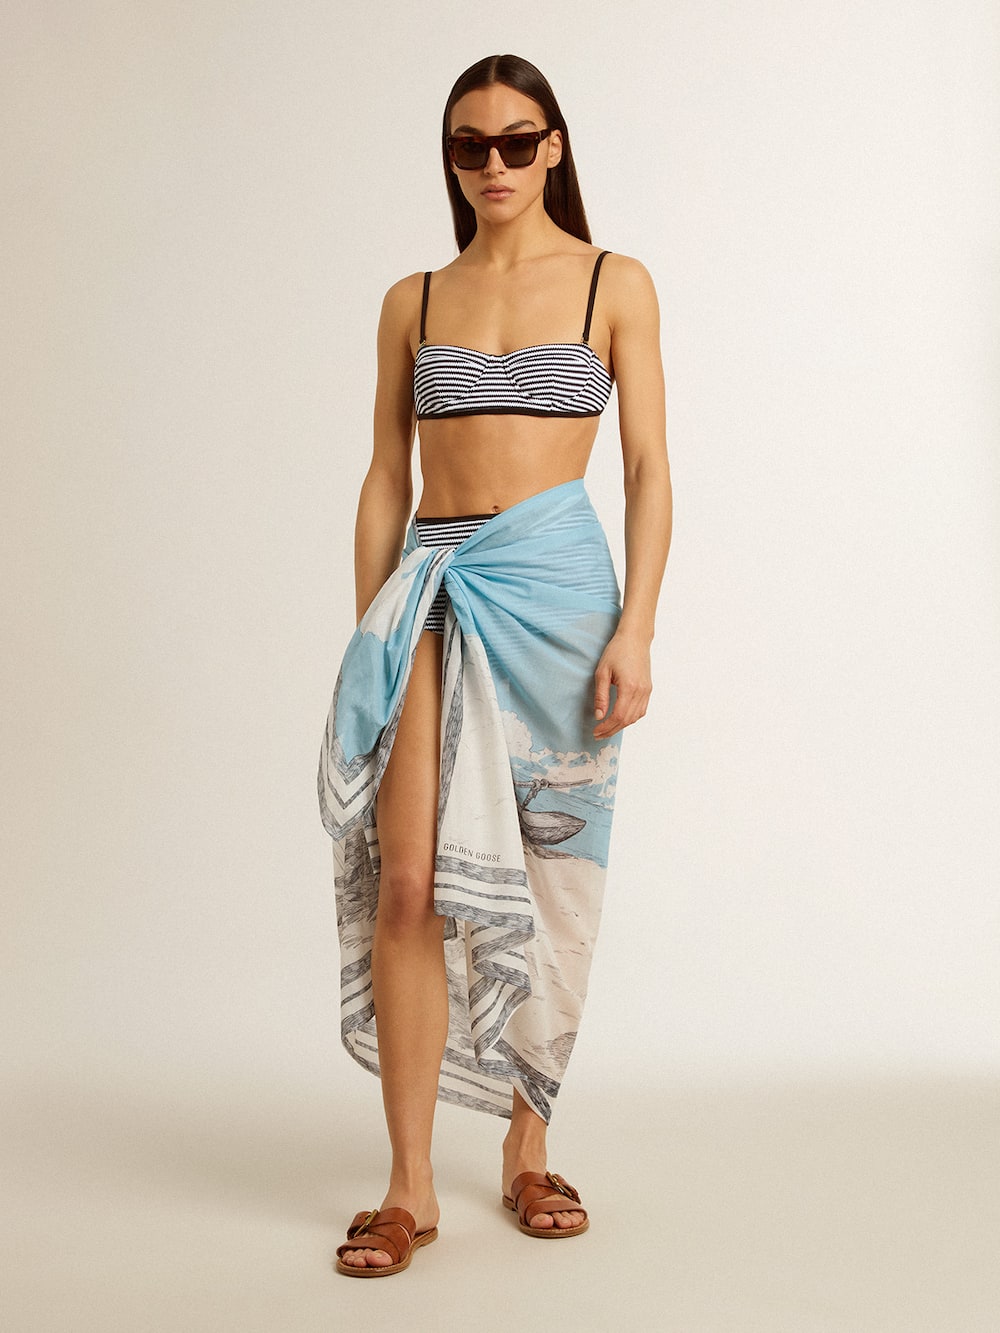 Golden Goose - Sarong in cotton voile with all-over cream and light blue print in 